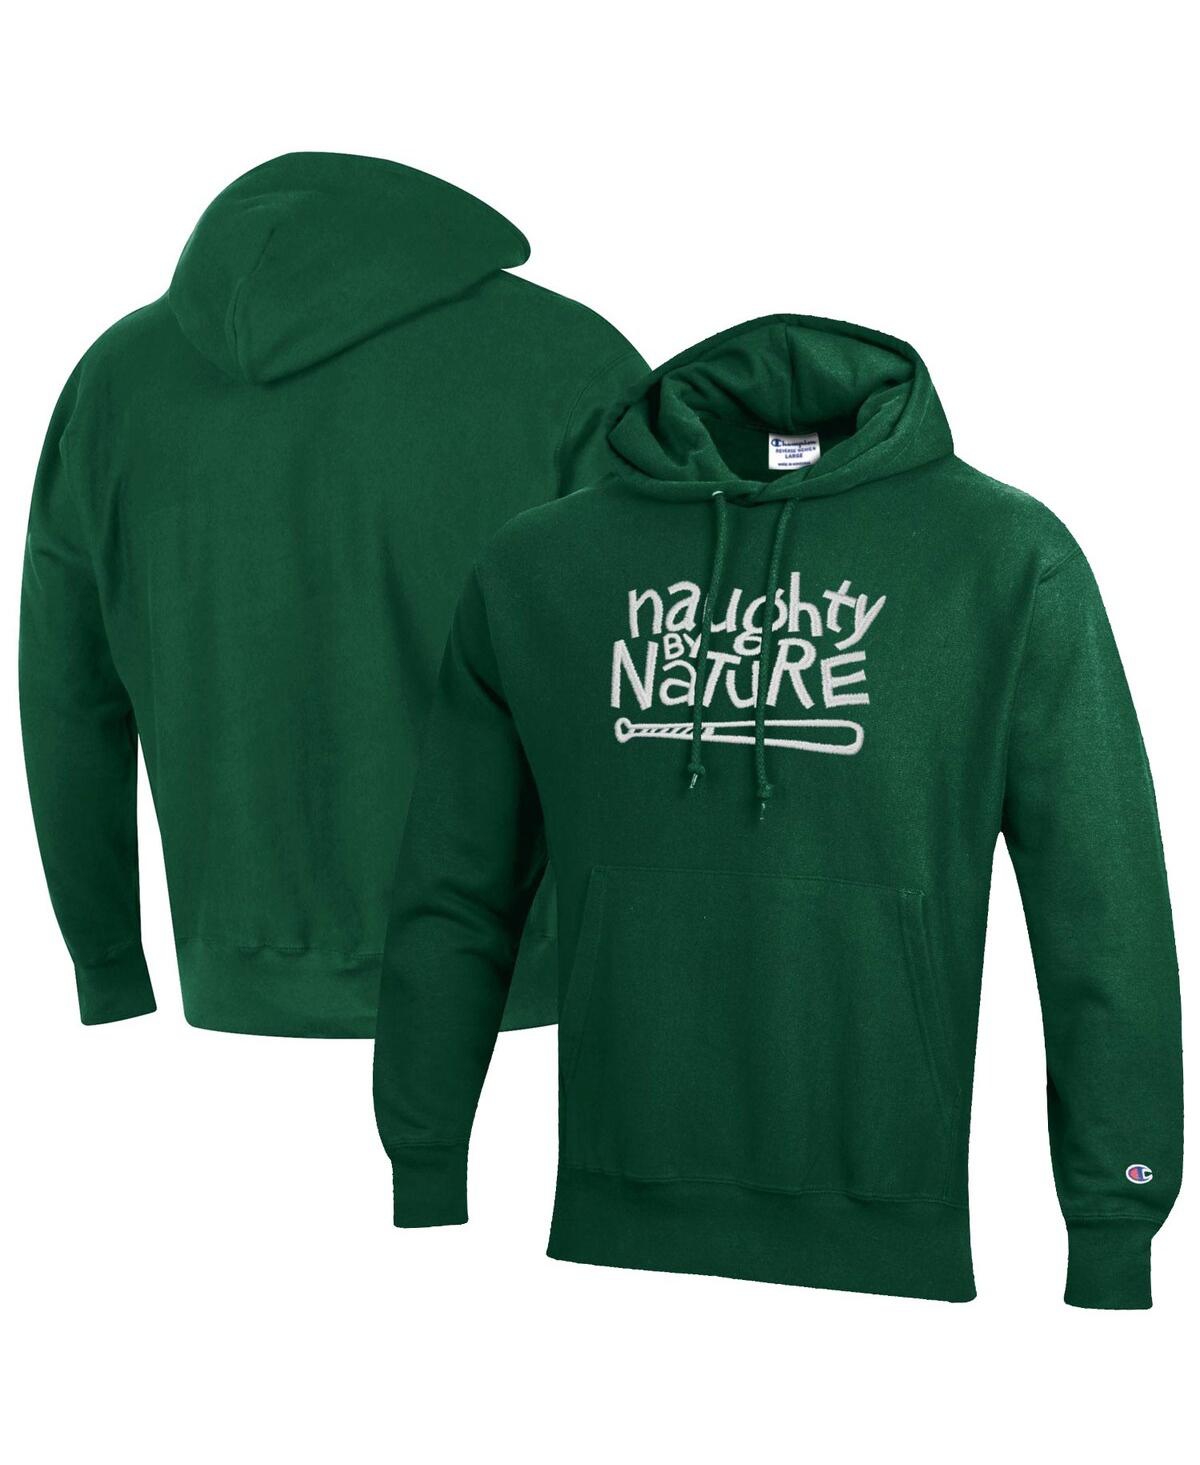 Men's and Women's Champion Hunter Green Naughty by Nature Reverse Weave Fleece Pullover Hoodie - Hunter Green